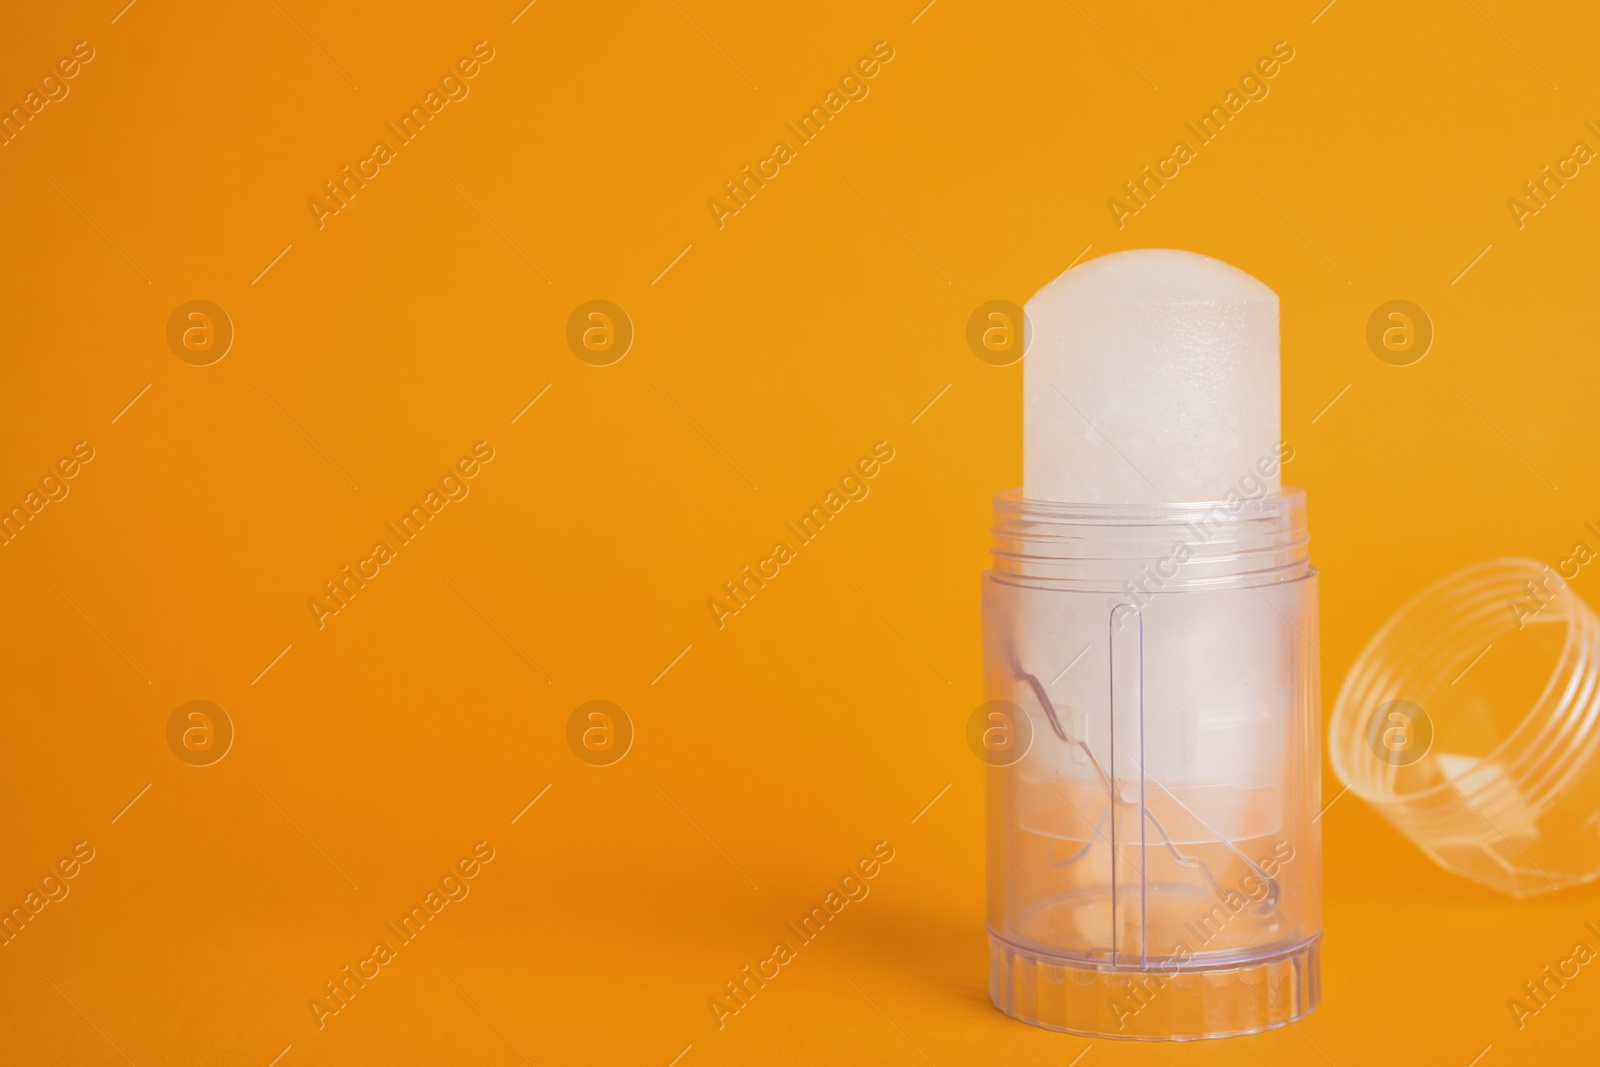 Photo of Natural crystal alum stick deodorant and cap on orange background. Space for text